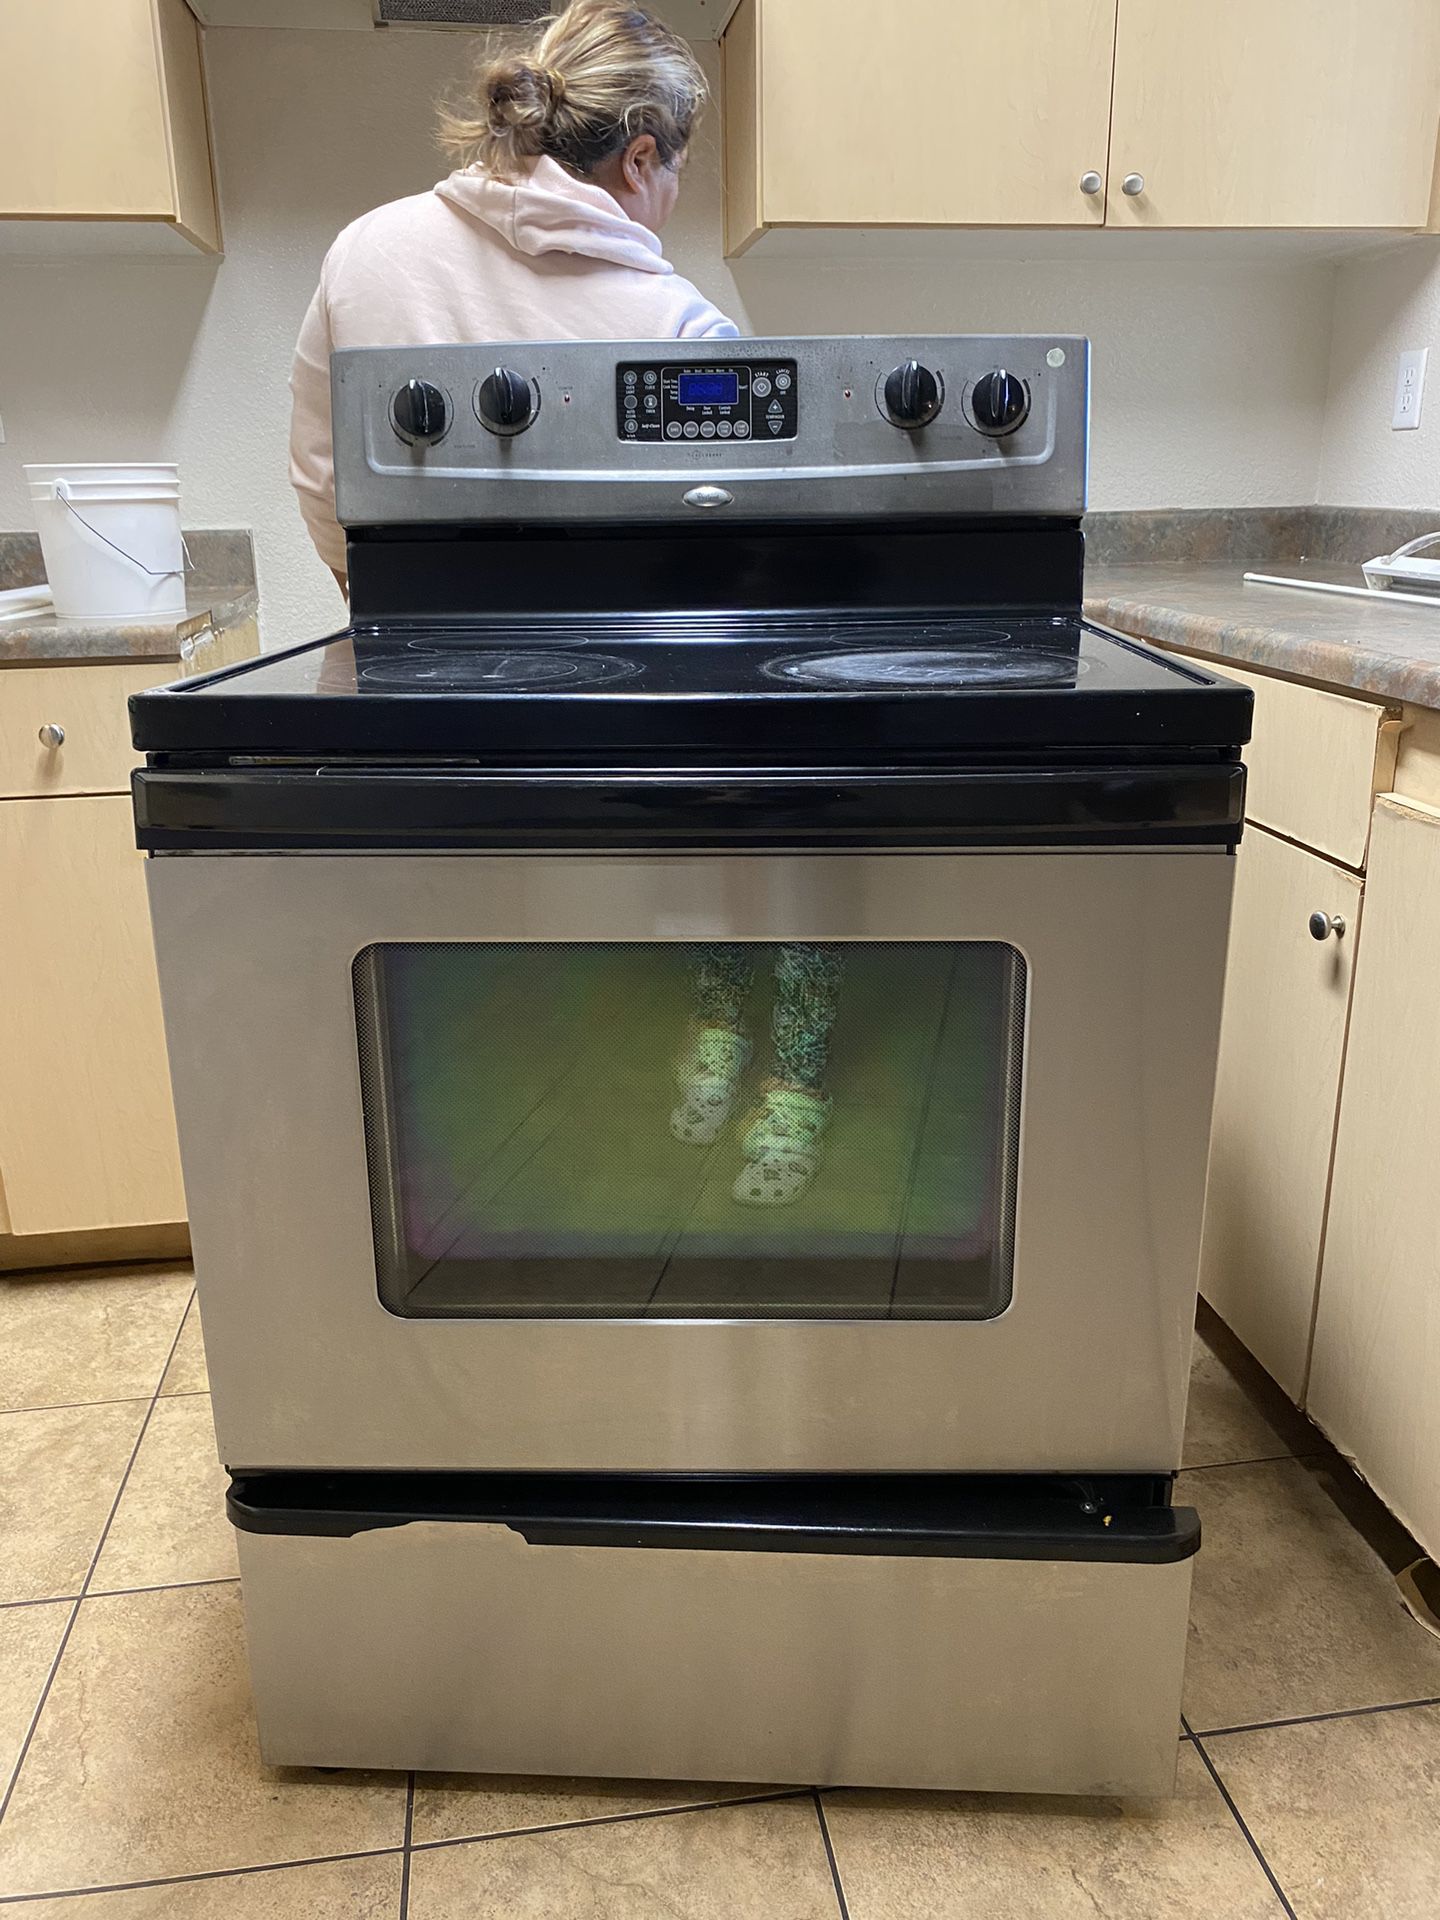 GE Toaster Oven for Sale in Bakersfield, CA - OfferUp